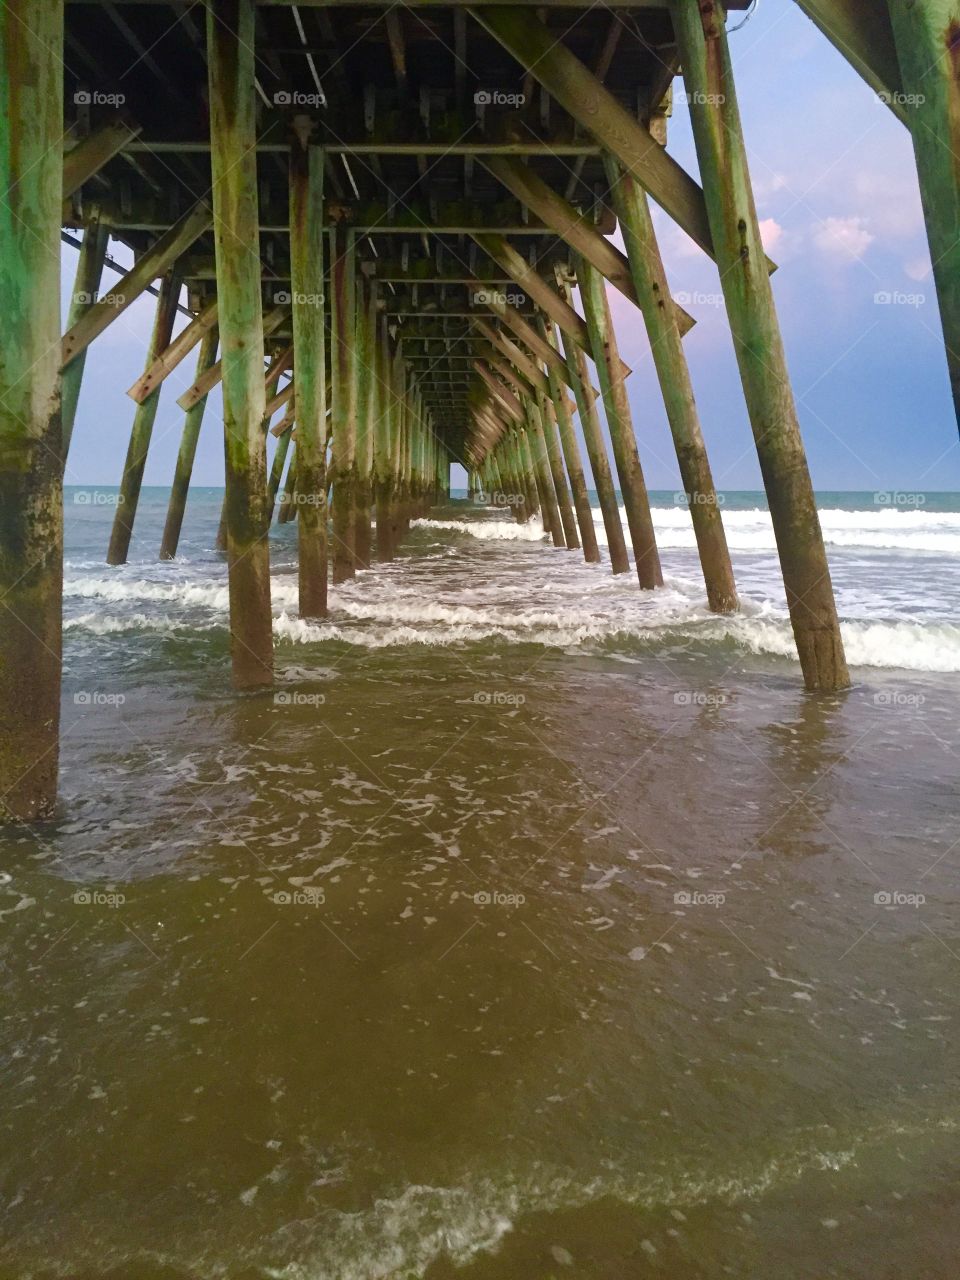 A view from under the pier, Myrtle Beach, South Carolina state park.